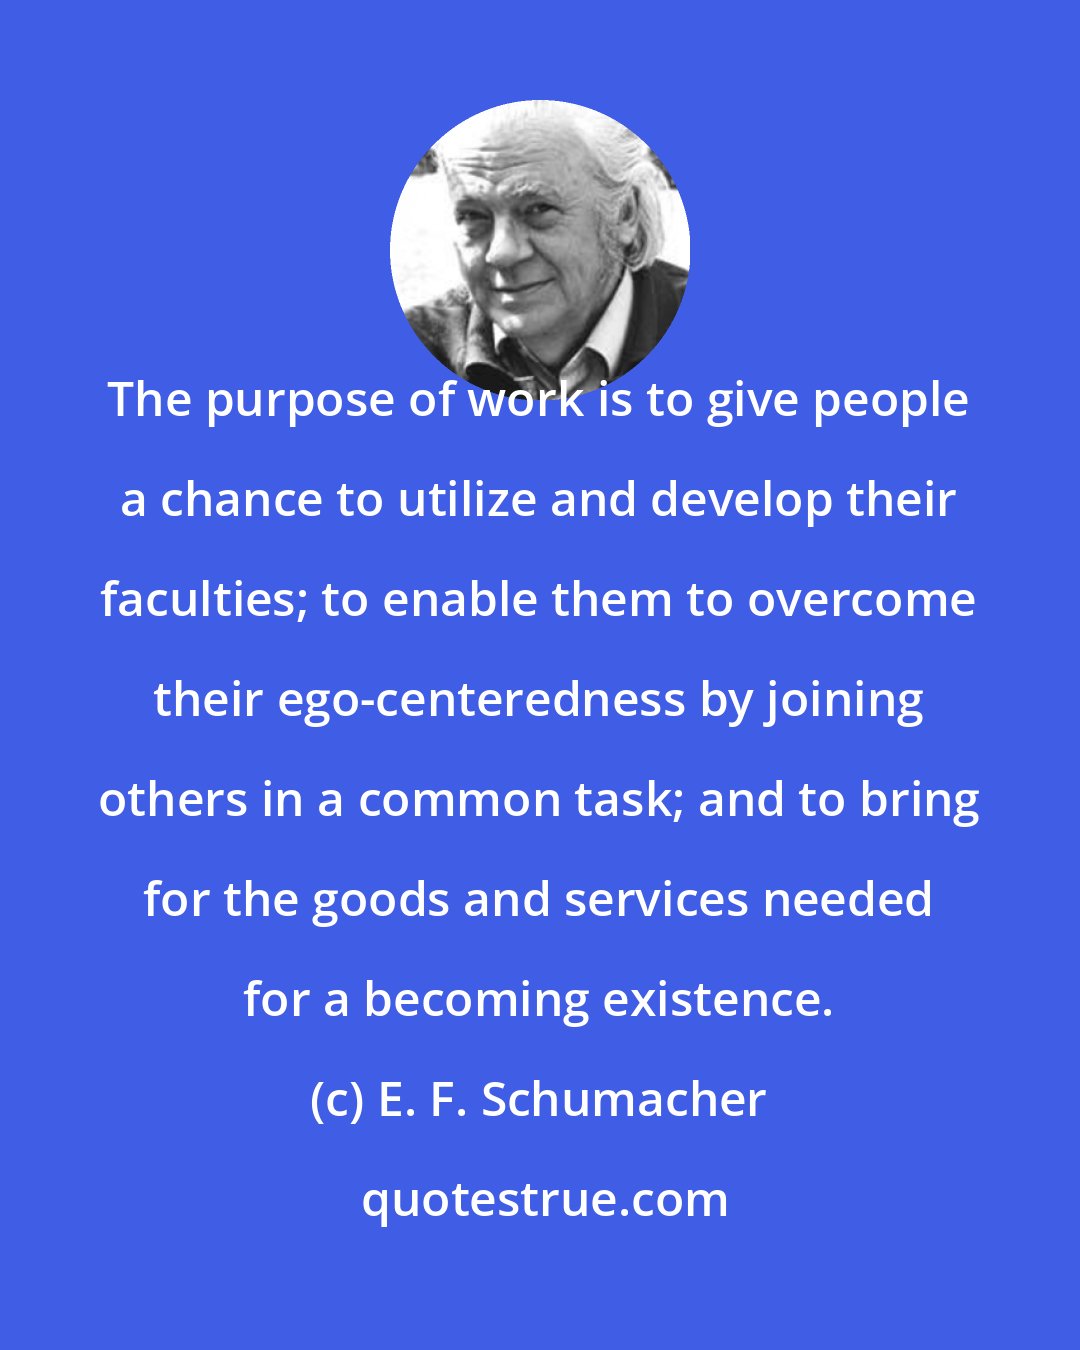 E. F. Schumacher: The purpose of work is to give people a chance to utilize and develop their faculties; to enable them to overcome their ego-centeredness by joining others in a common task; and to bring for the goods and services needed for a becoming existence.